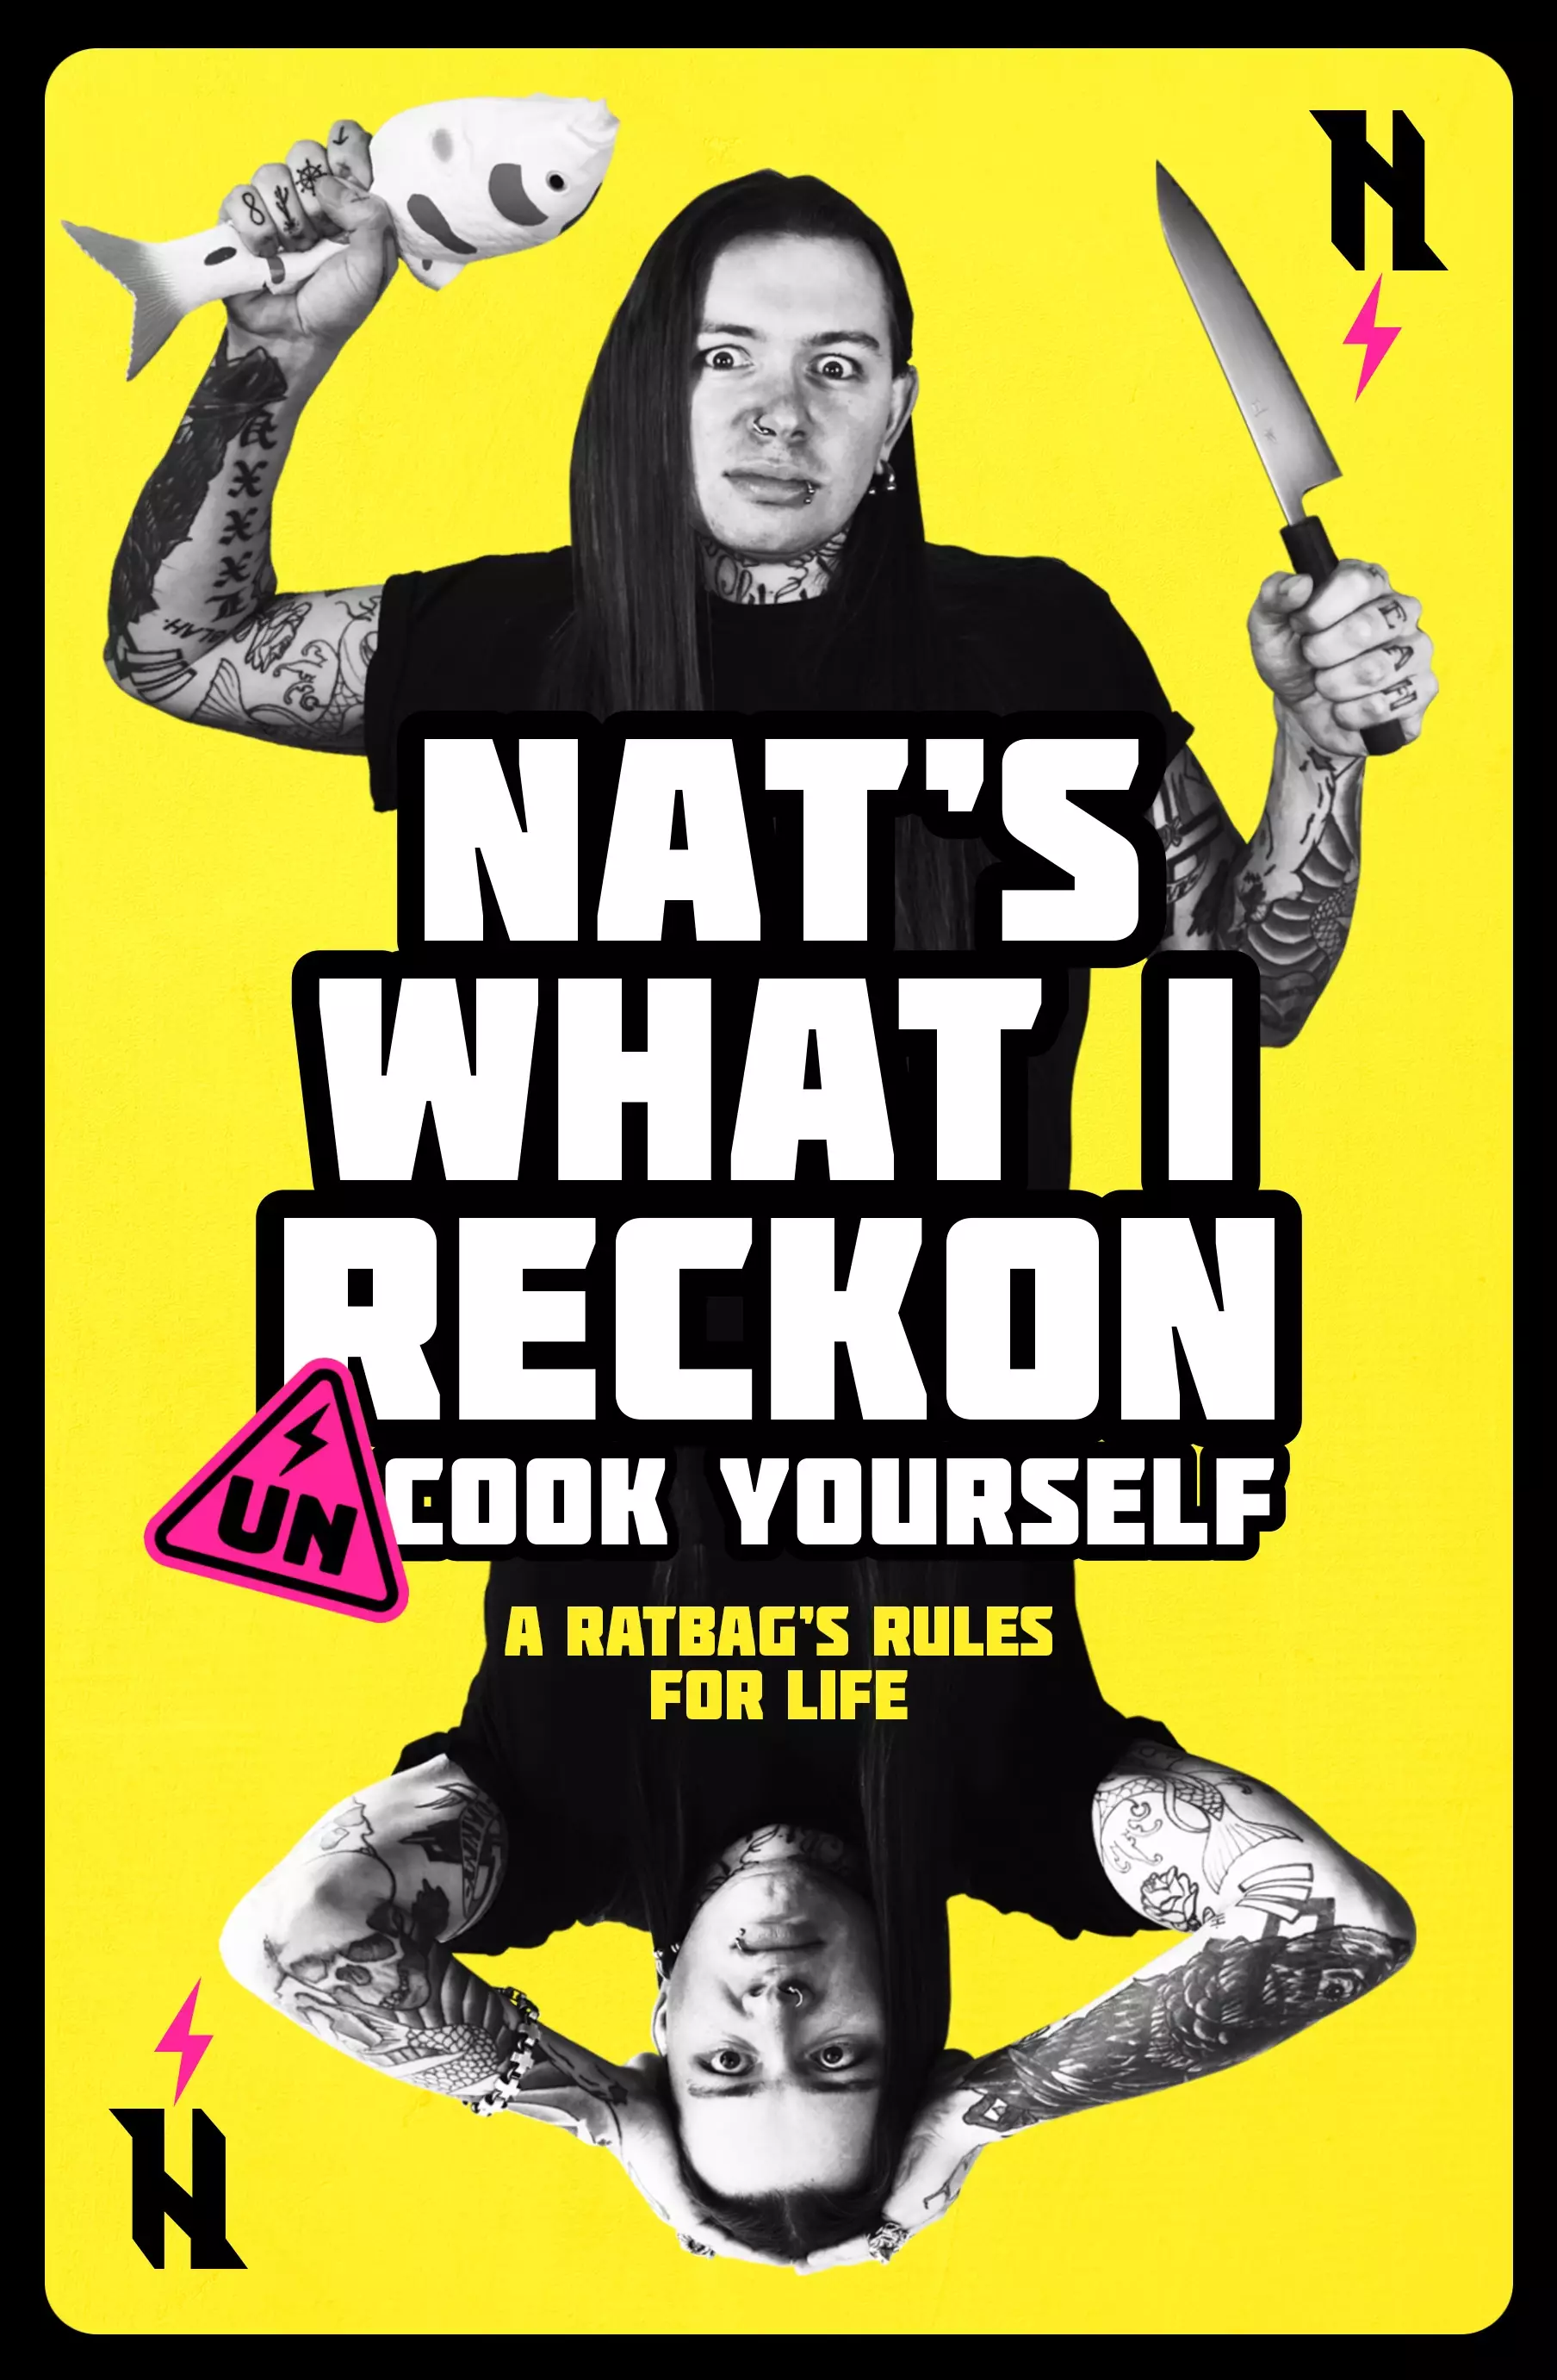 'Un-Cook Yourself: A Ratbag's Rules For Life' is out on December 1.